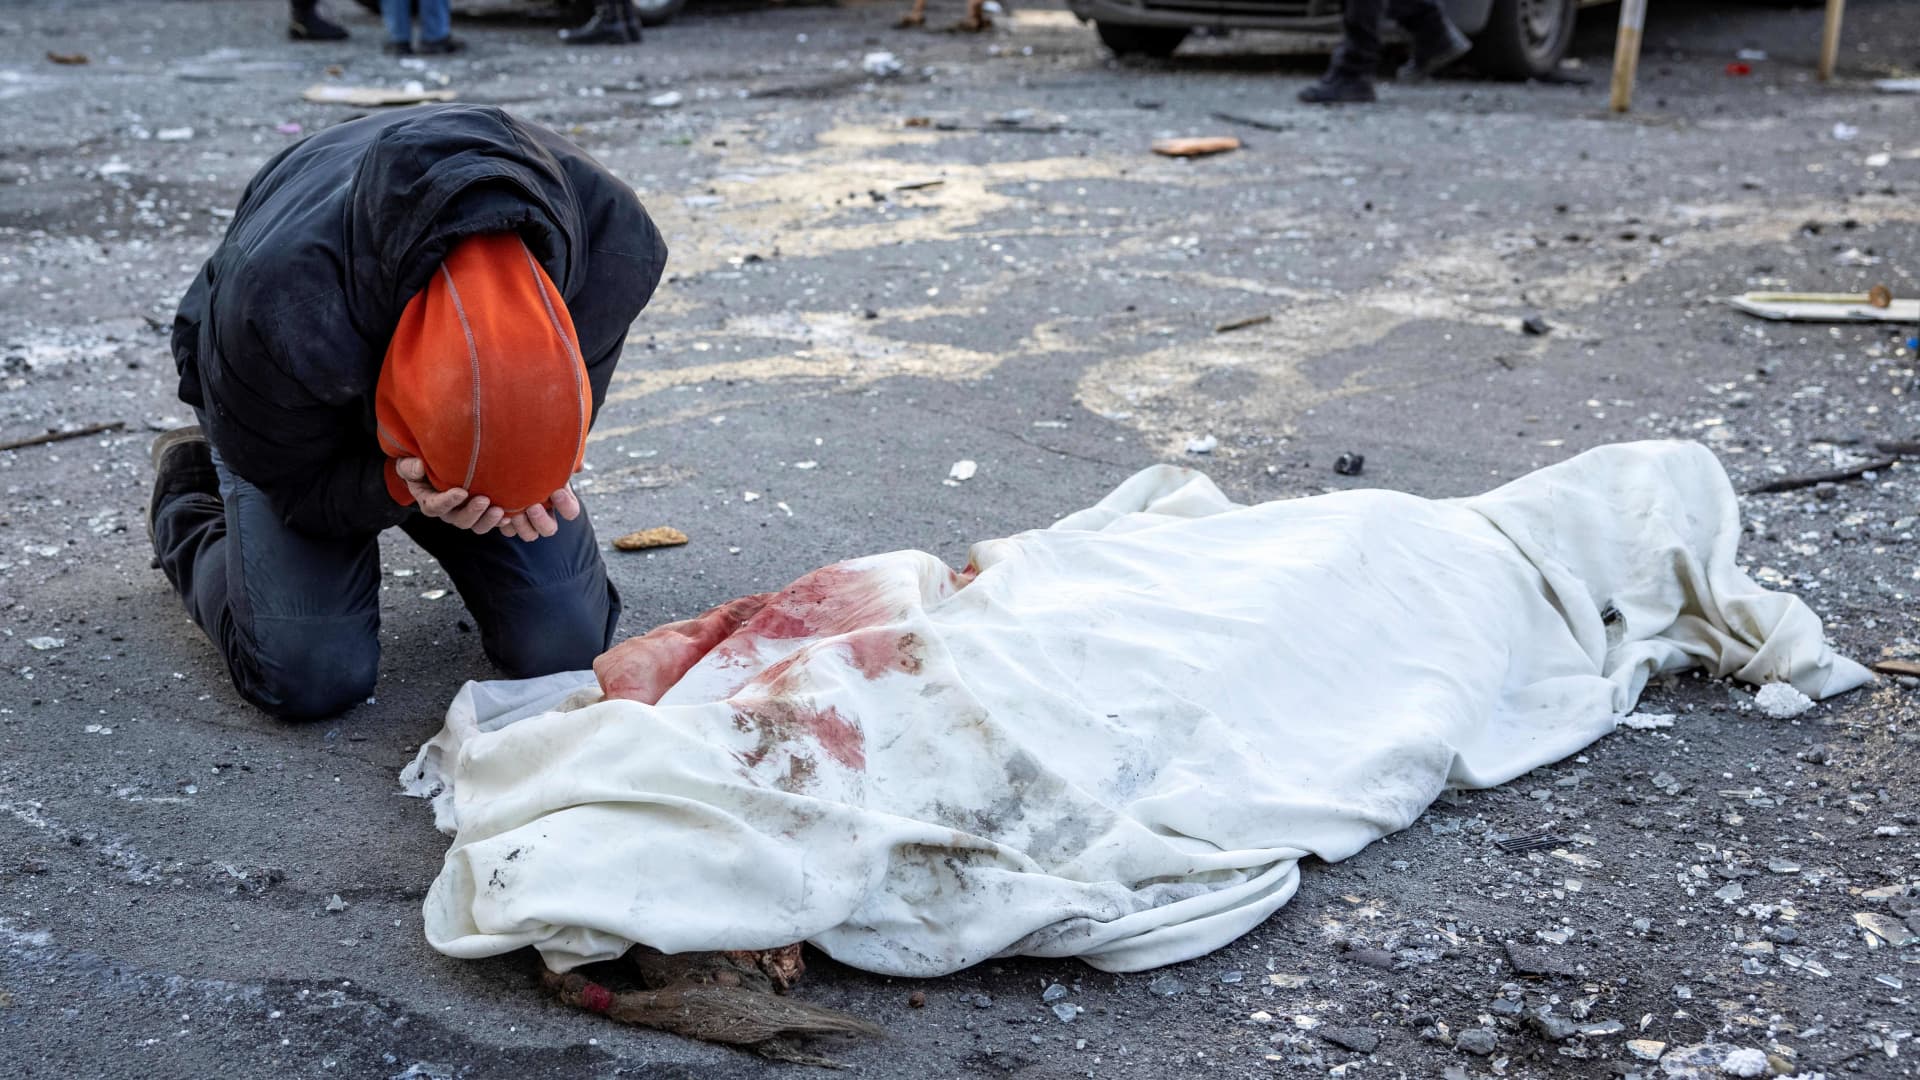 EDITORS NOTE: Graphic content / A person mourns next to a wrapped body near a residential building which was hit by the debris from a downed rocket in Kyiv on March 17, 2022.